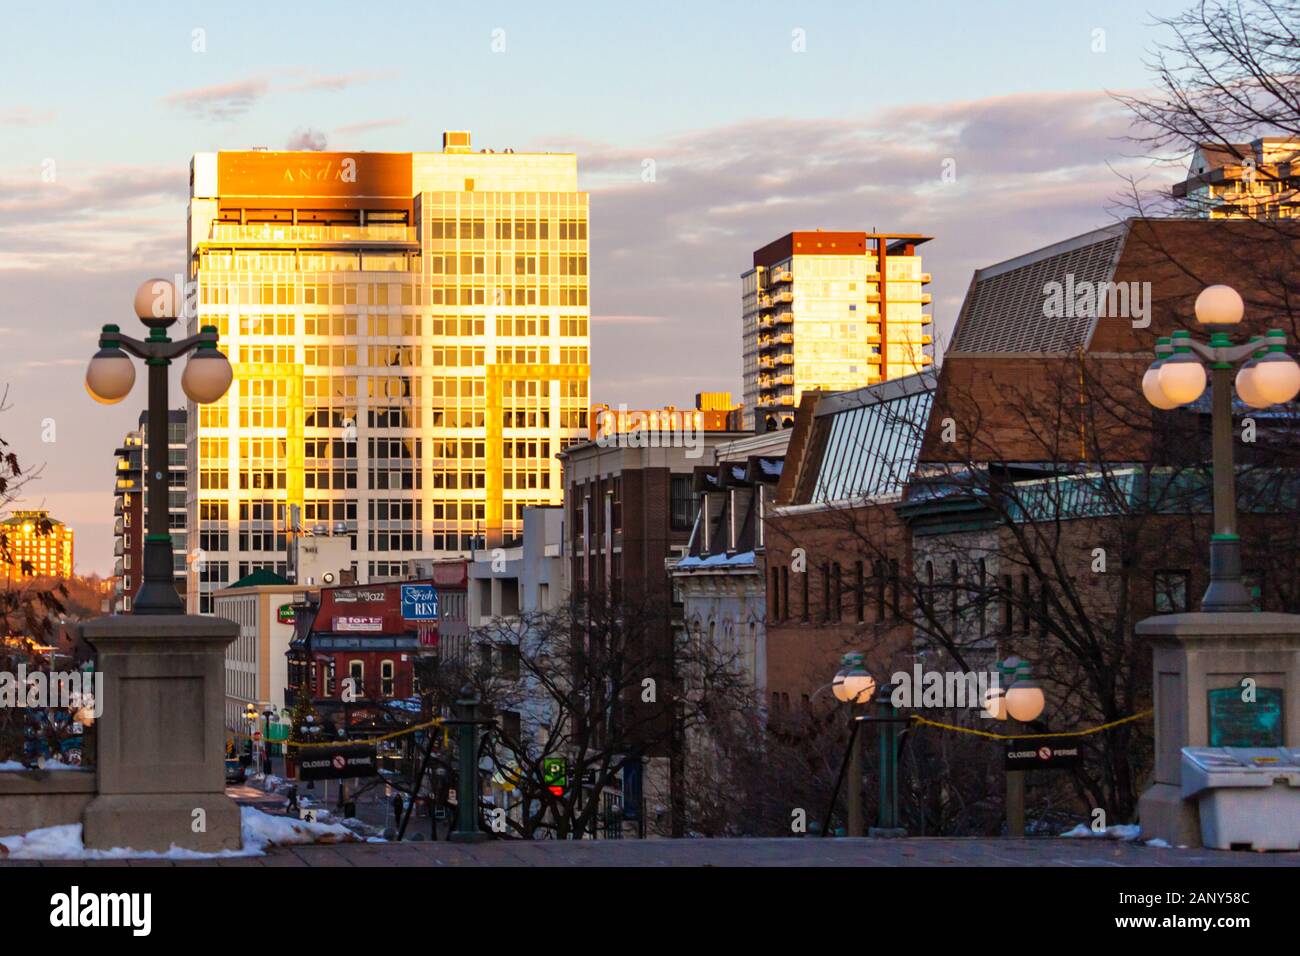 A high view down York Street shows the ByWard Market with the large Andaz Hotel, a luxury hotel brand operated by Hyatt, looking over the area. Stock Photo